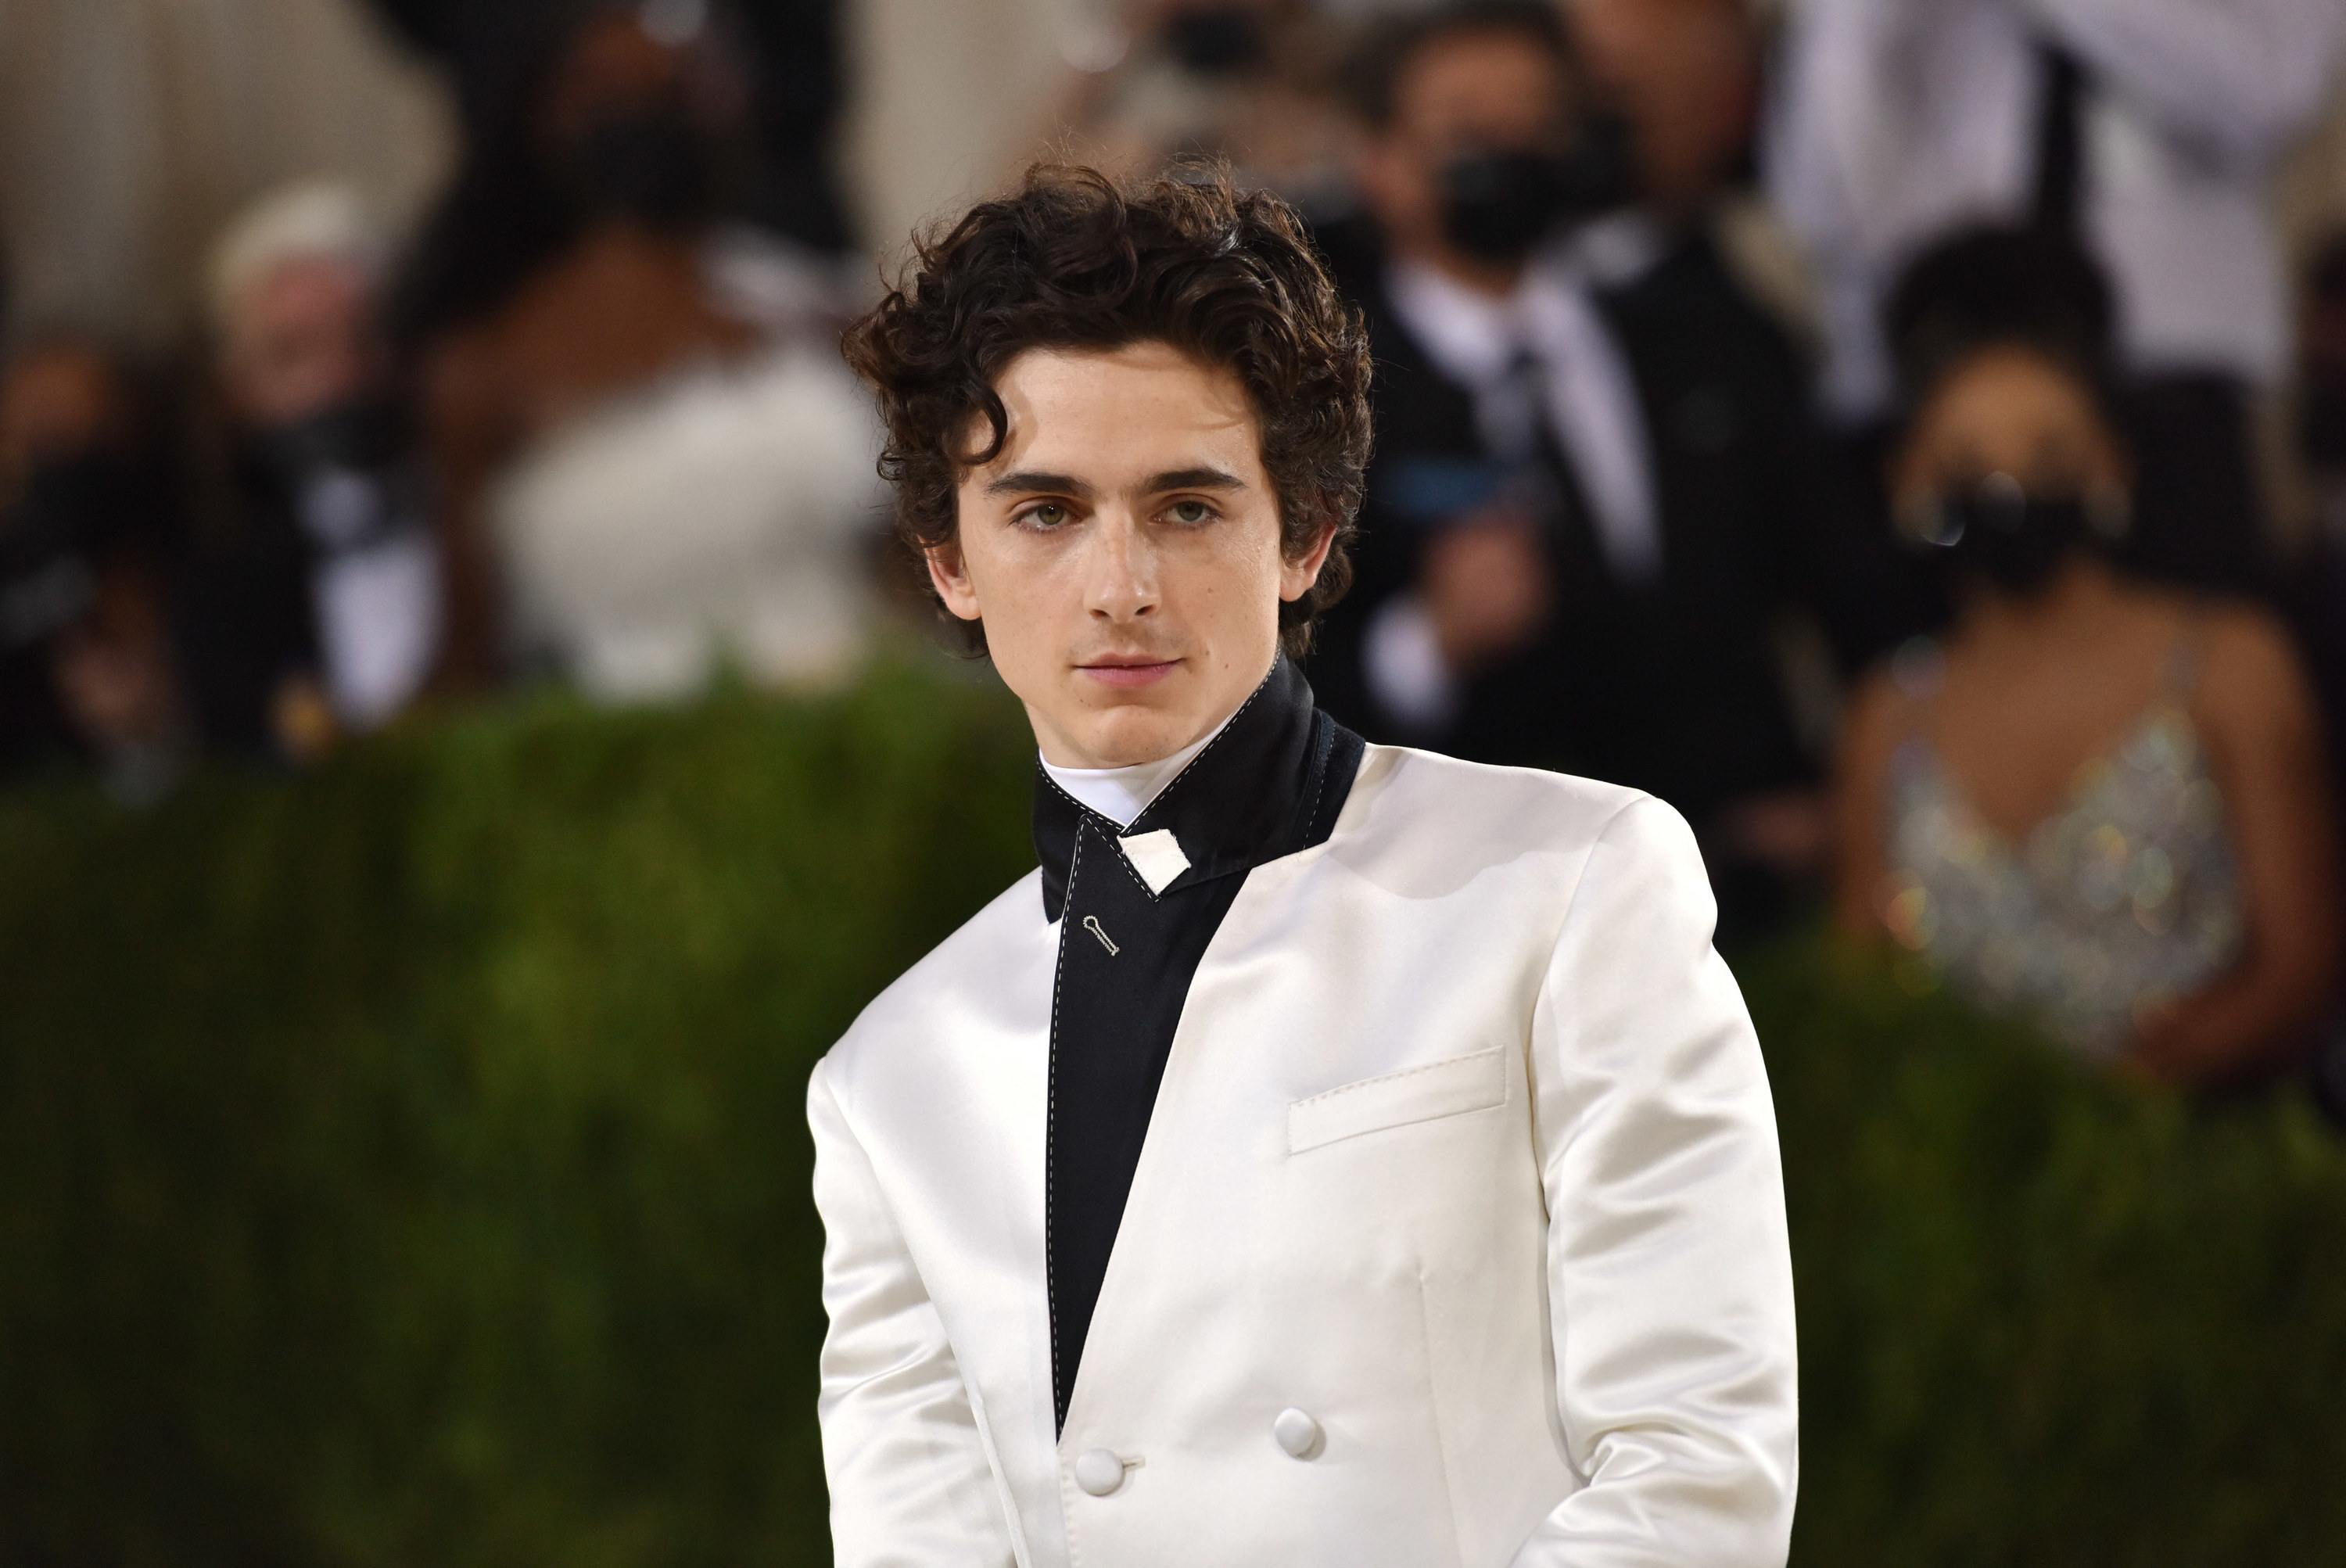 Kylie Jenner Is Dating Timothée Chalamet: Inside Their 'Casual' Romance